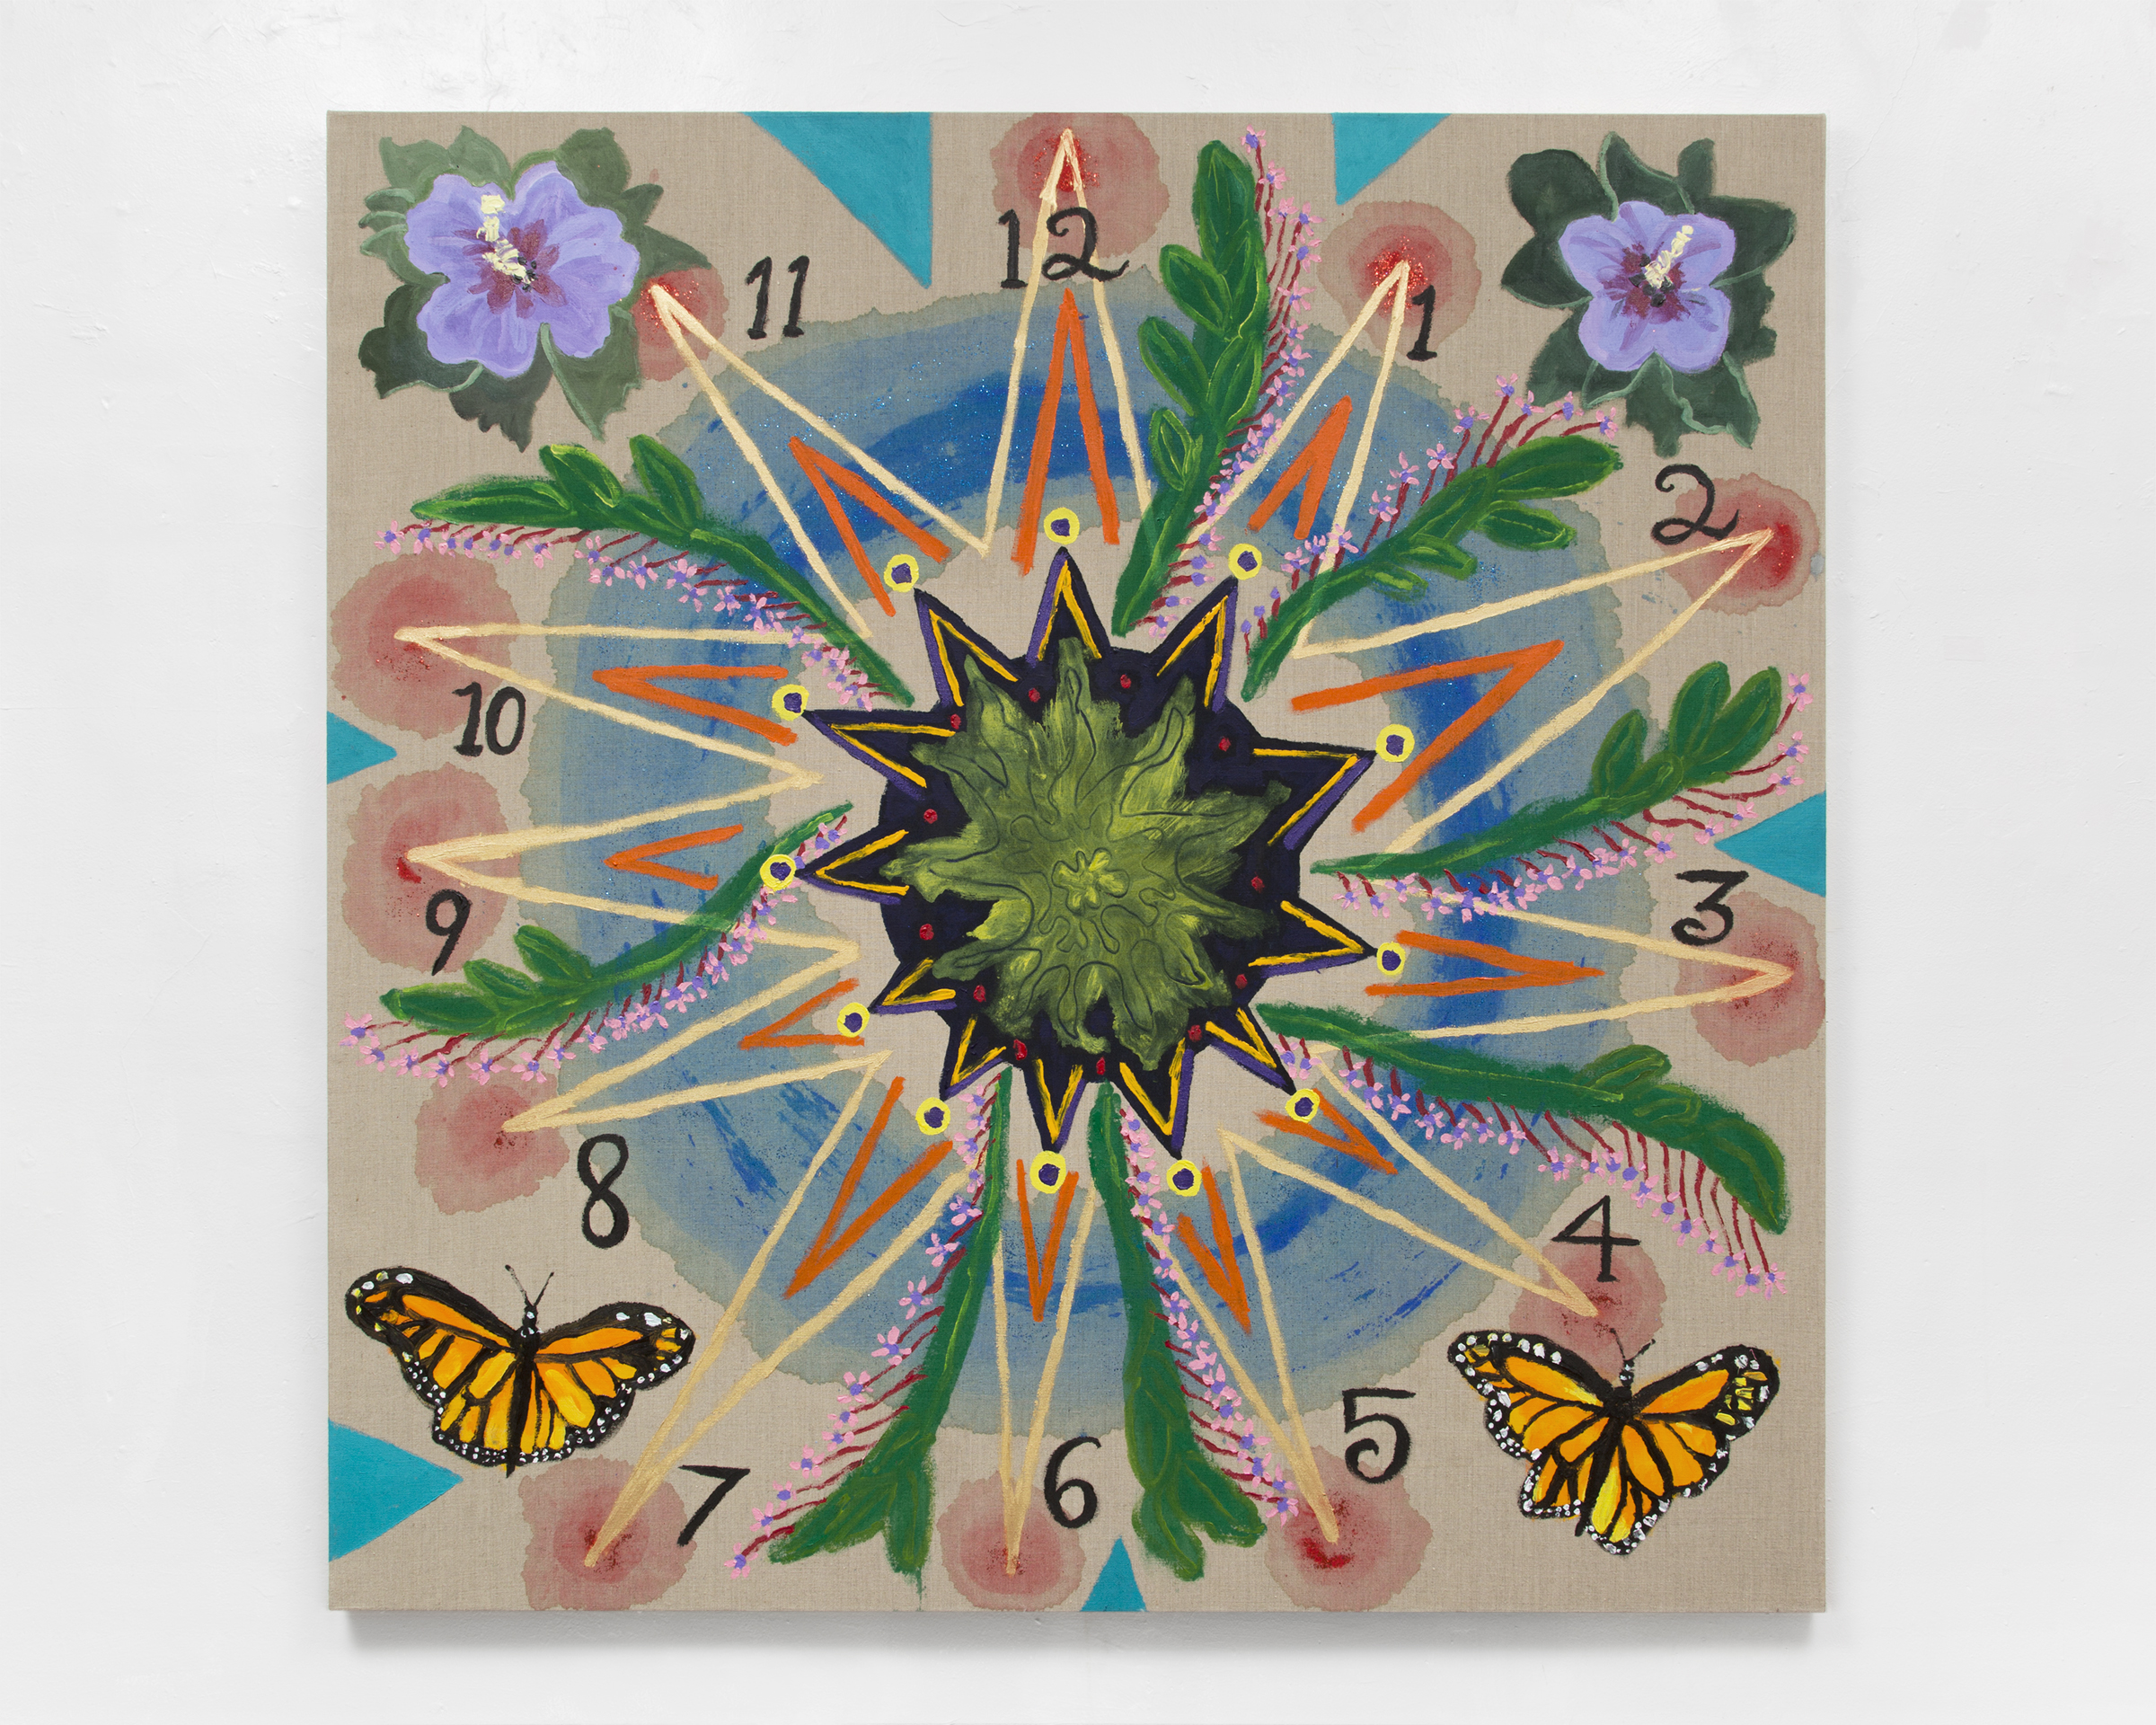 Tabboo! The Clock, 2018, currently on view at Herald St. Acrylic and glitter on linen, 60 